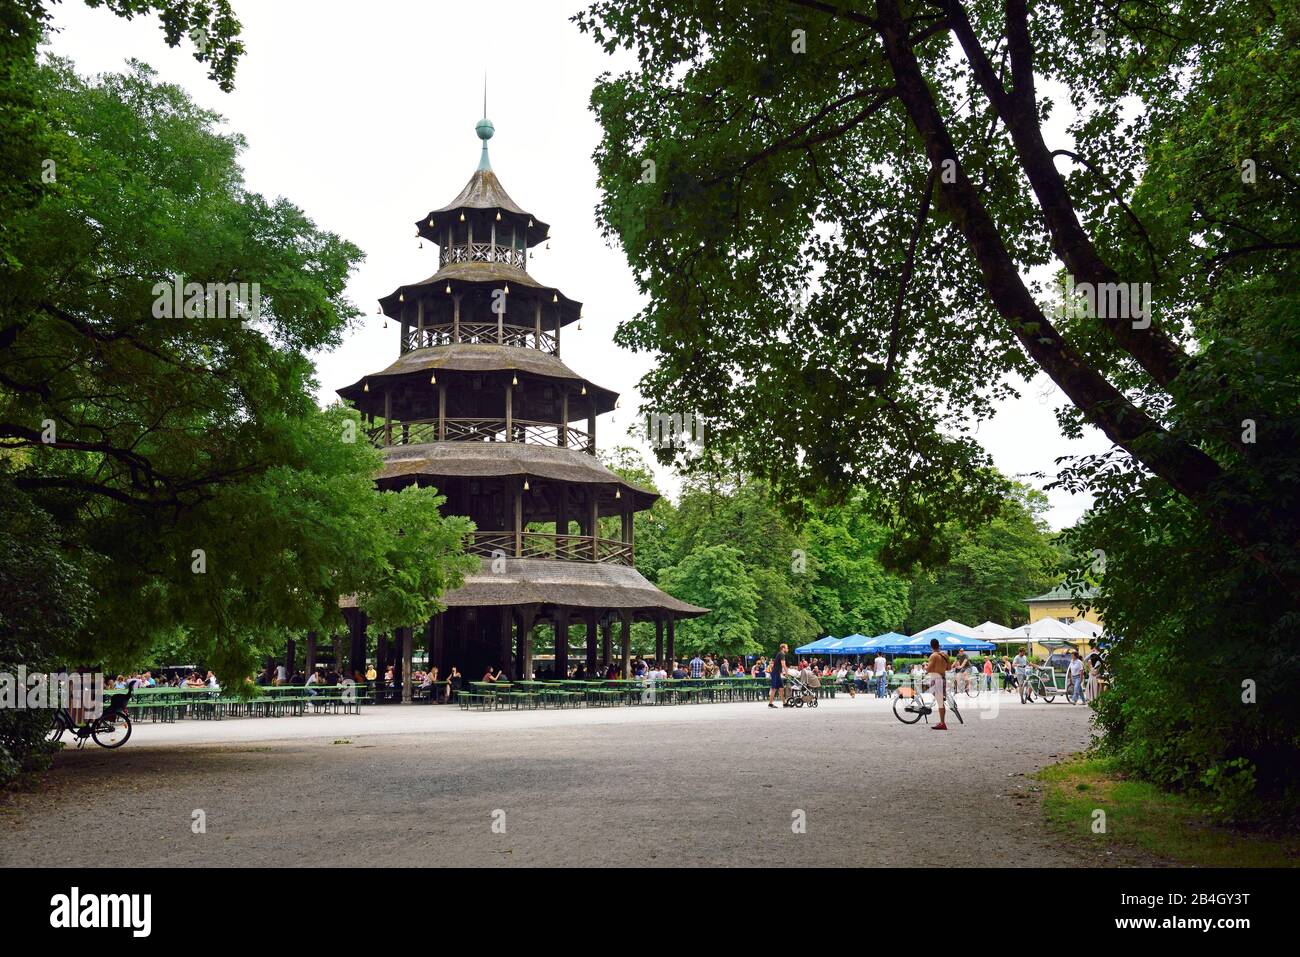 Europe, Germany, Bavaria, Munich, English Garden, city park between Lehel and Schwabing, view to the Chinese Tower, Stock Photo